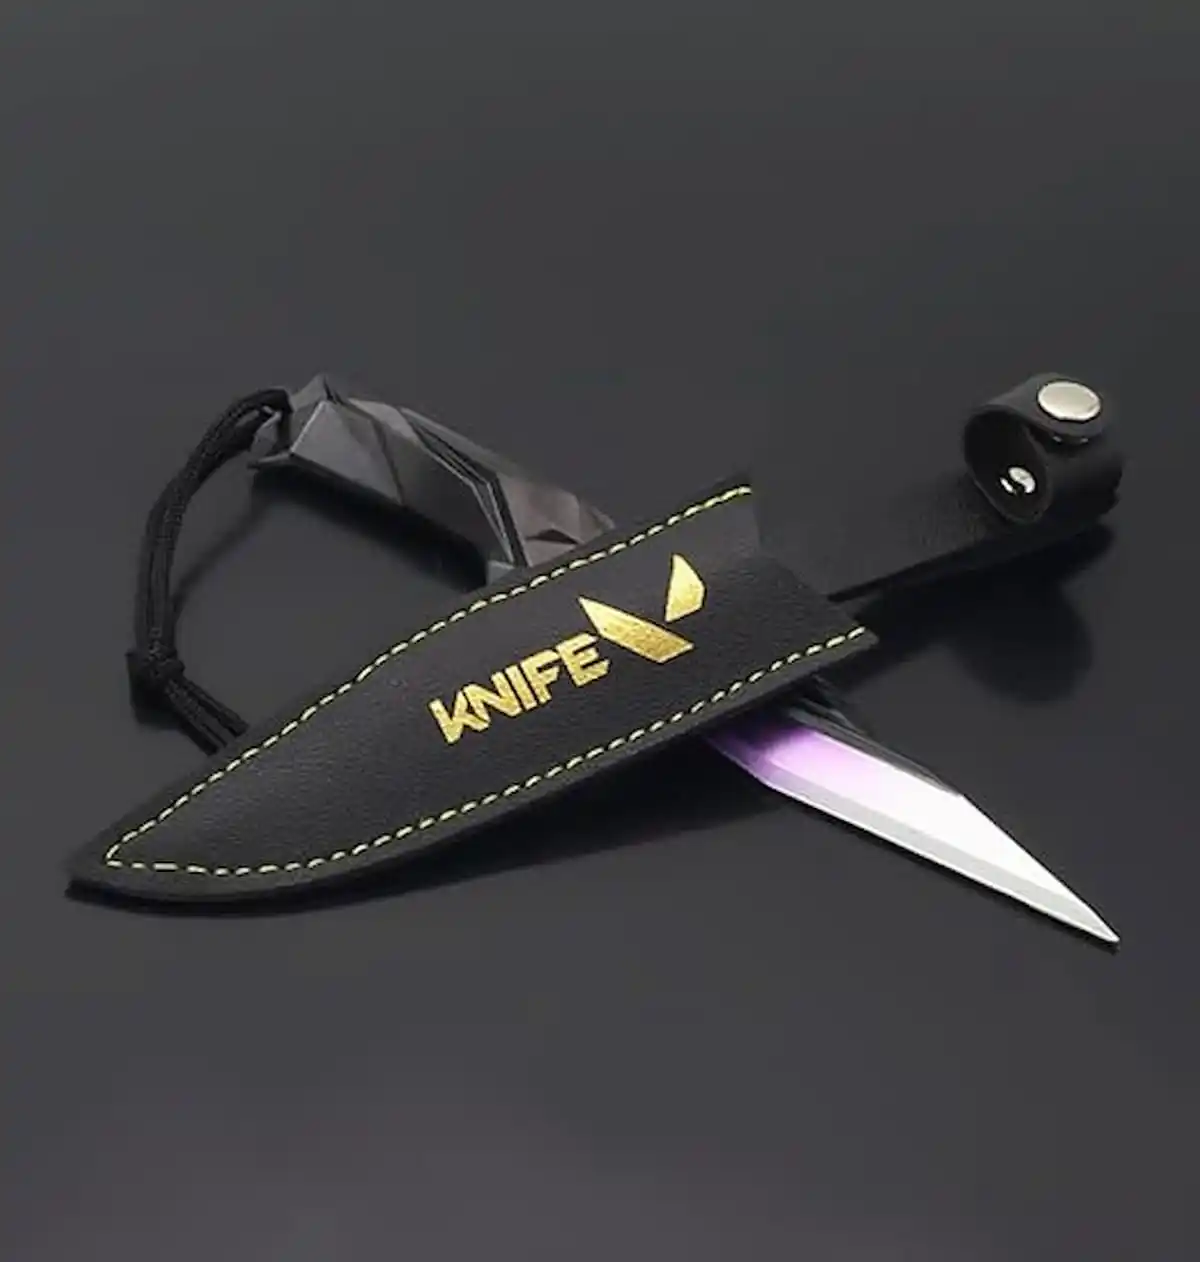 An image of a model of the Valorant Singularity Knife